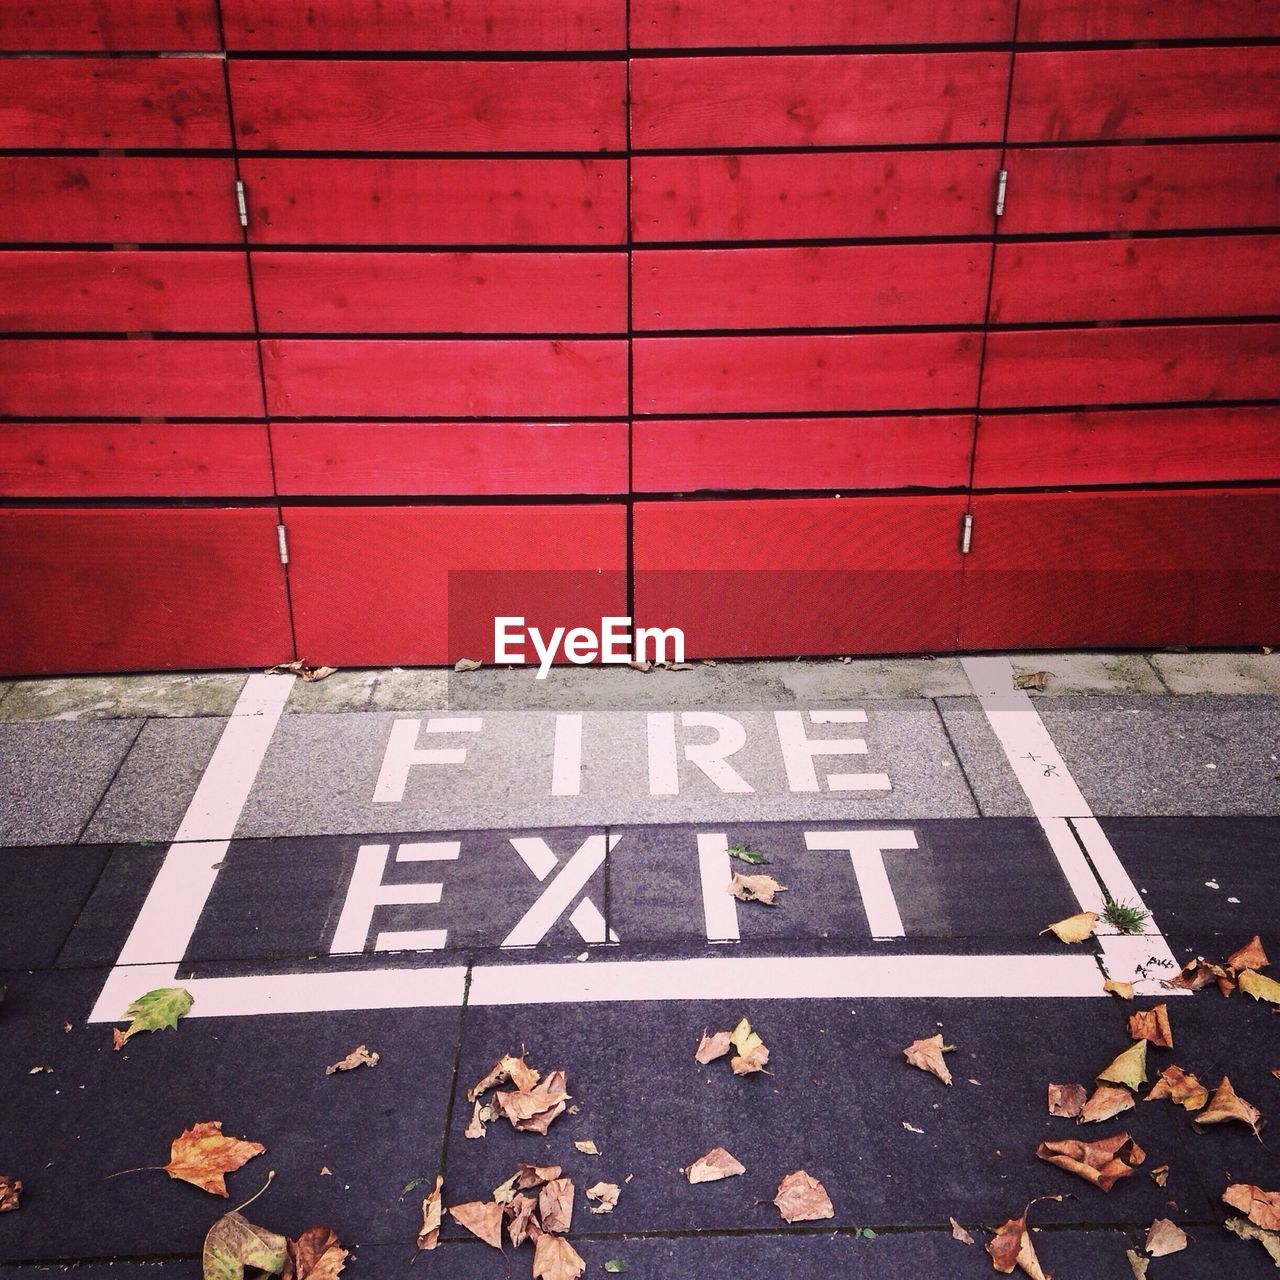 Fire exit of red wooden building